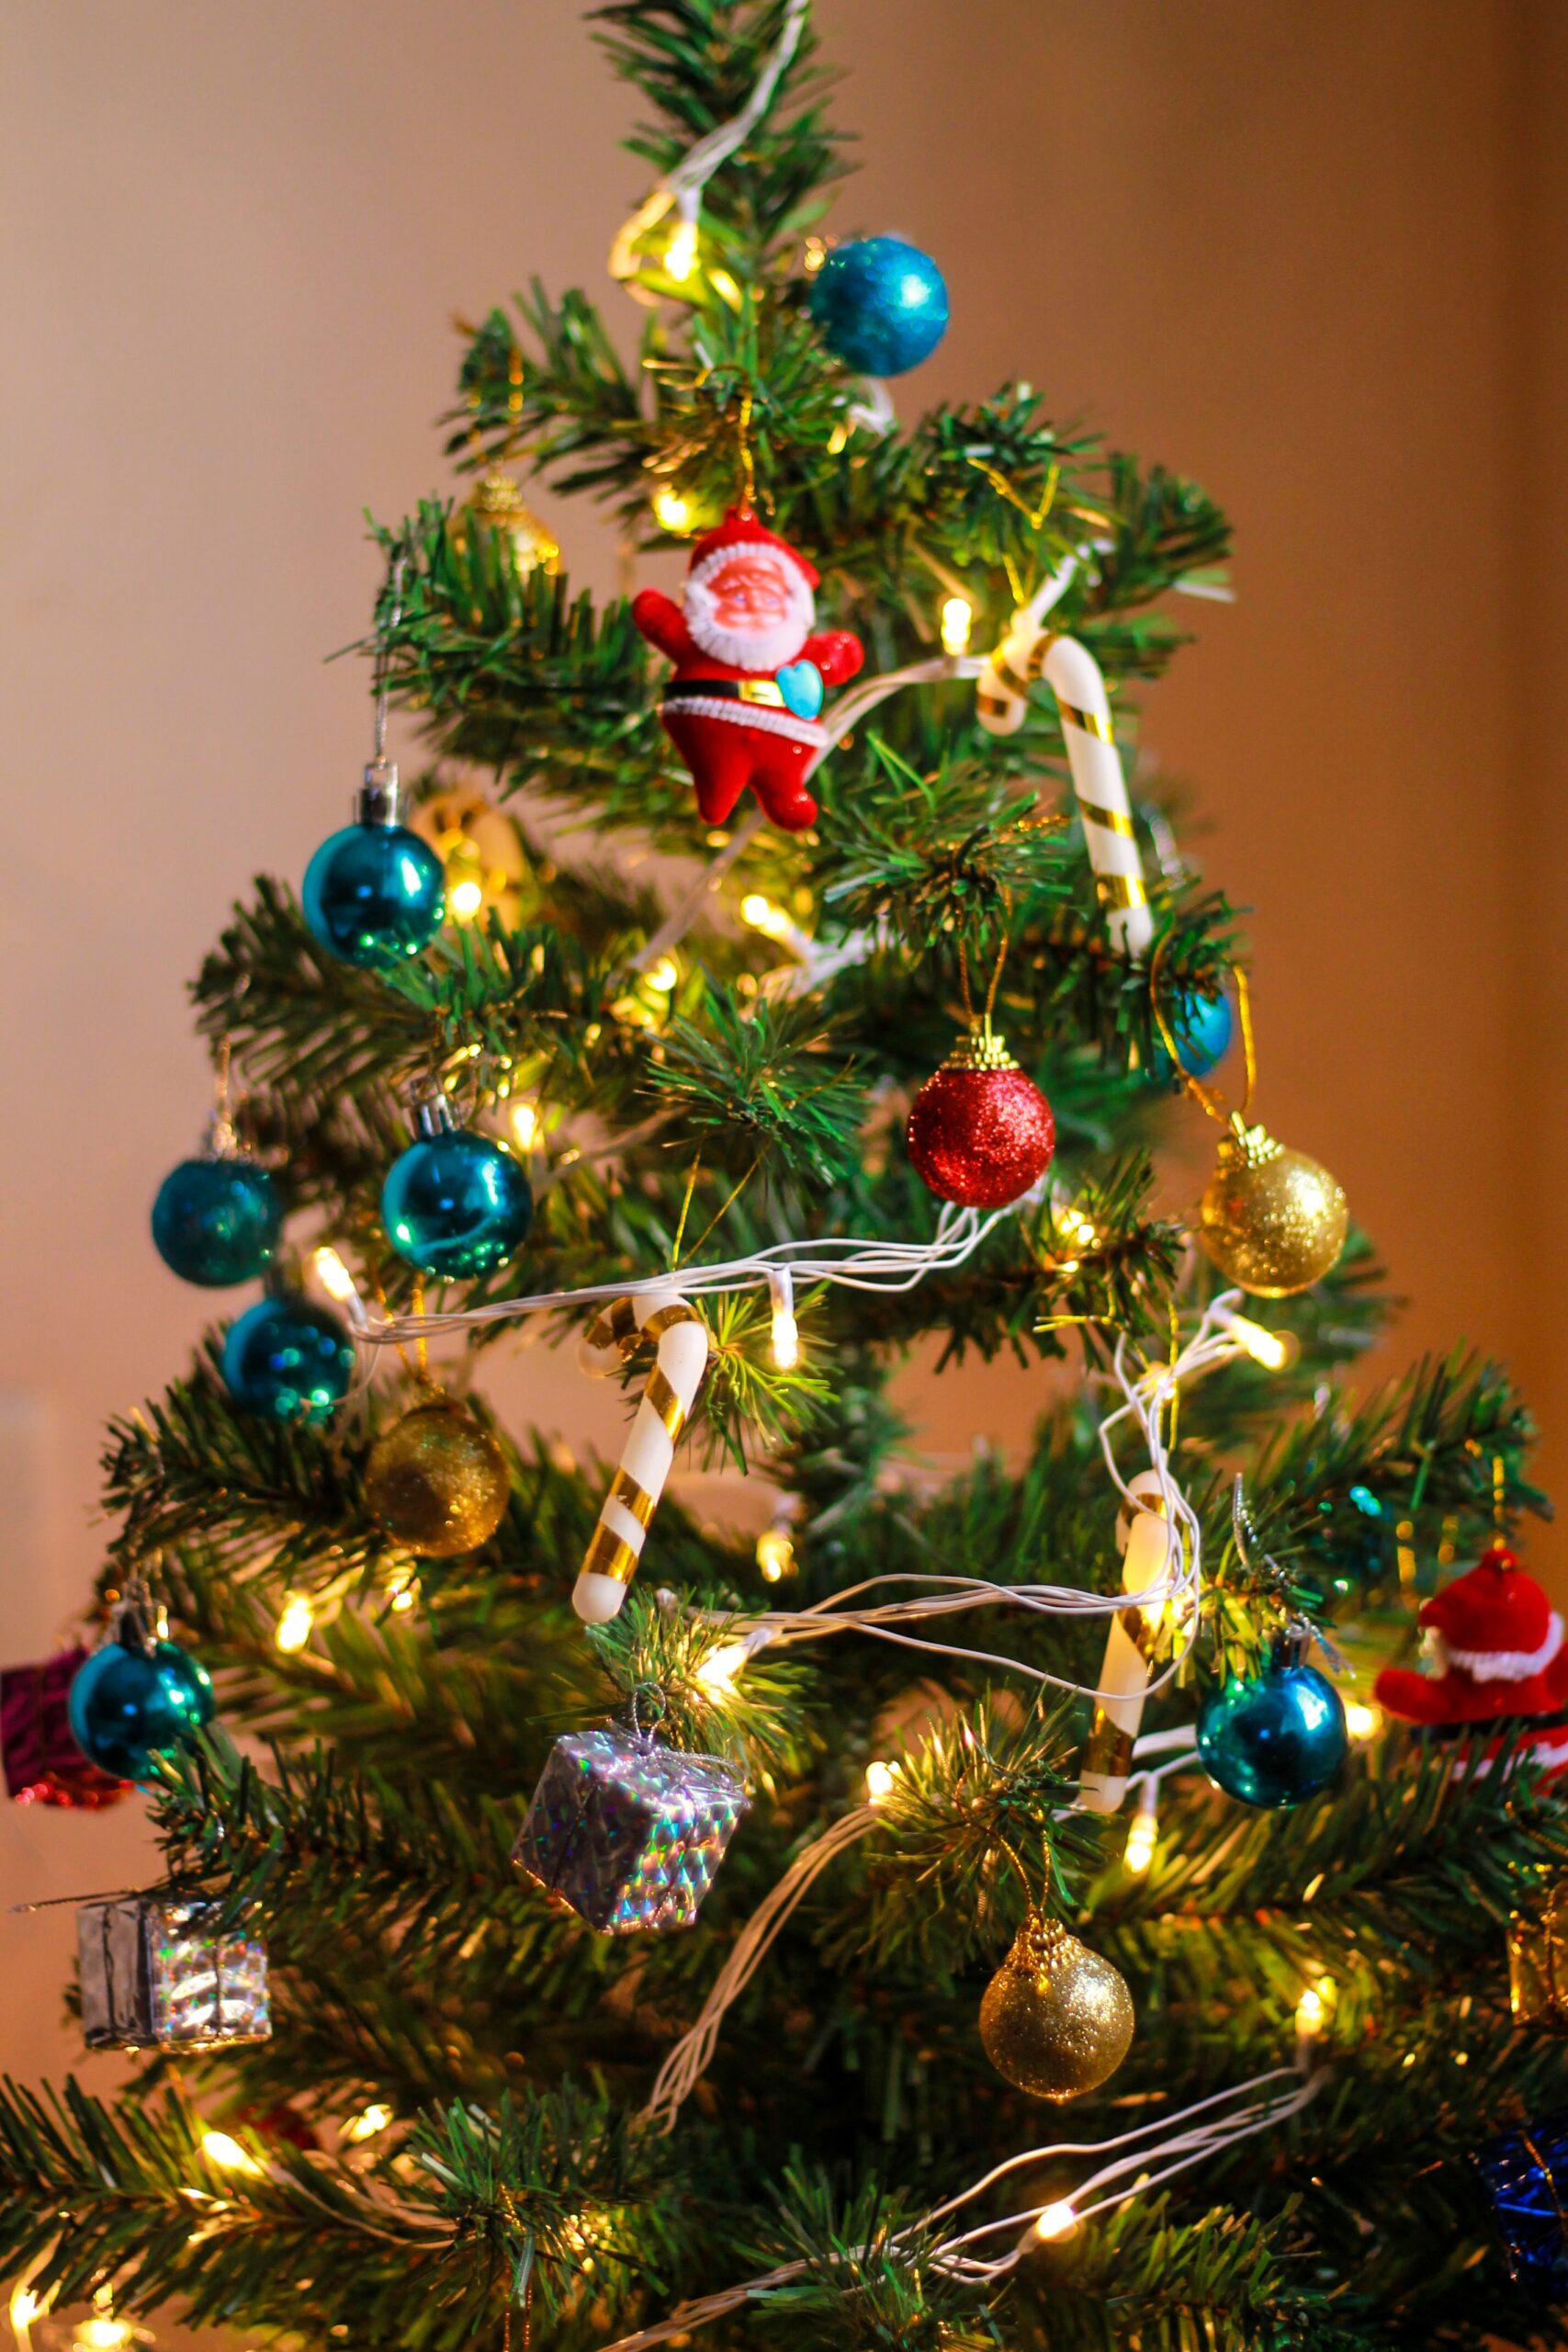 Protecting Your Home Against Holiday-Related Liabilities